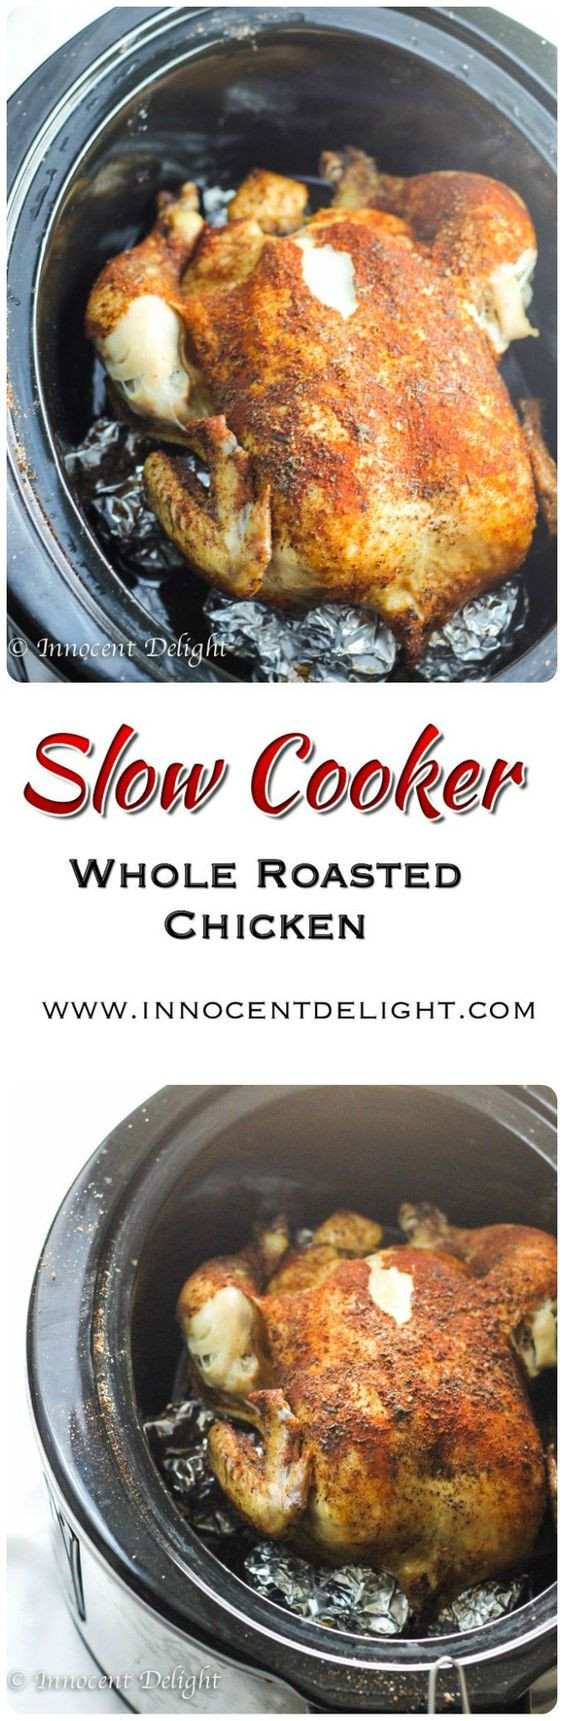 Slow Cooker Whole Roast Chicken
 Slow Cooker Whole Roasted Chicken Recipe